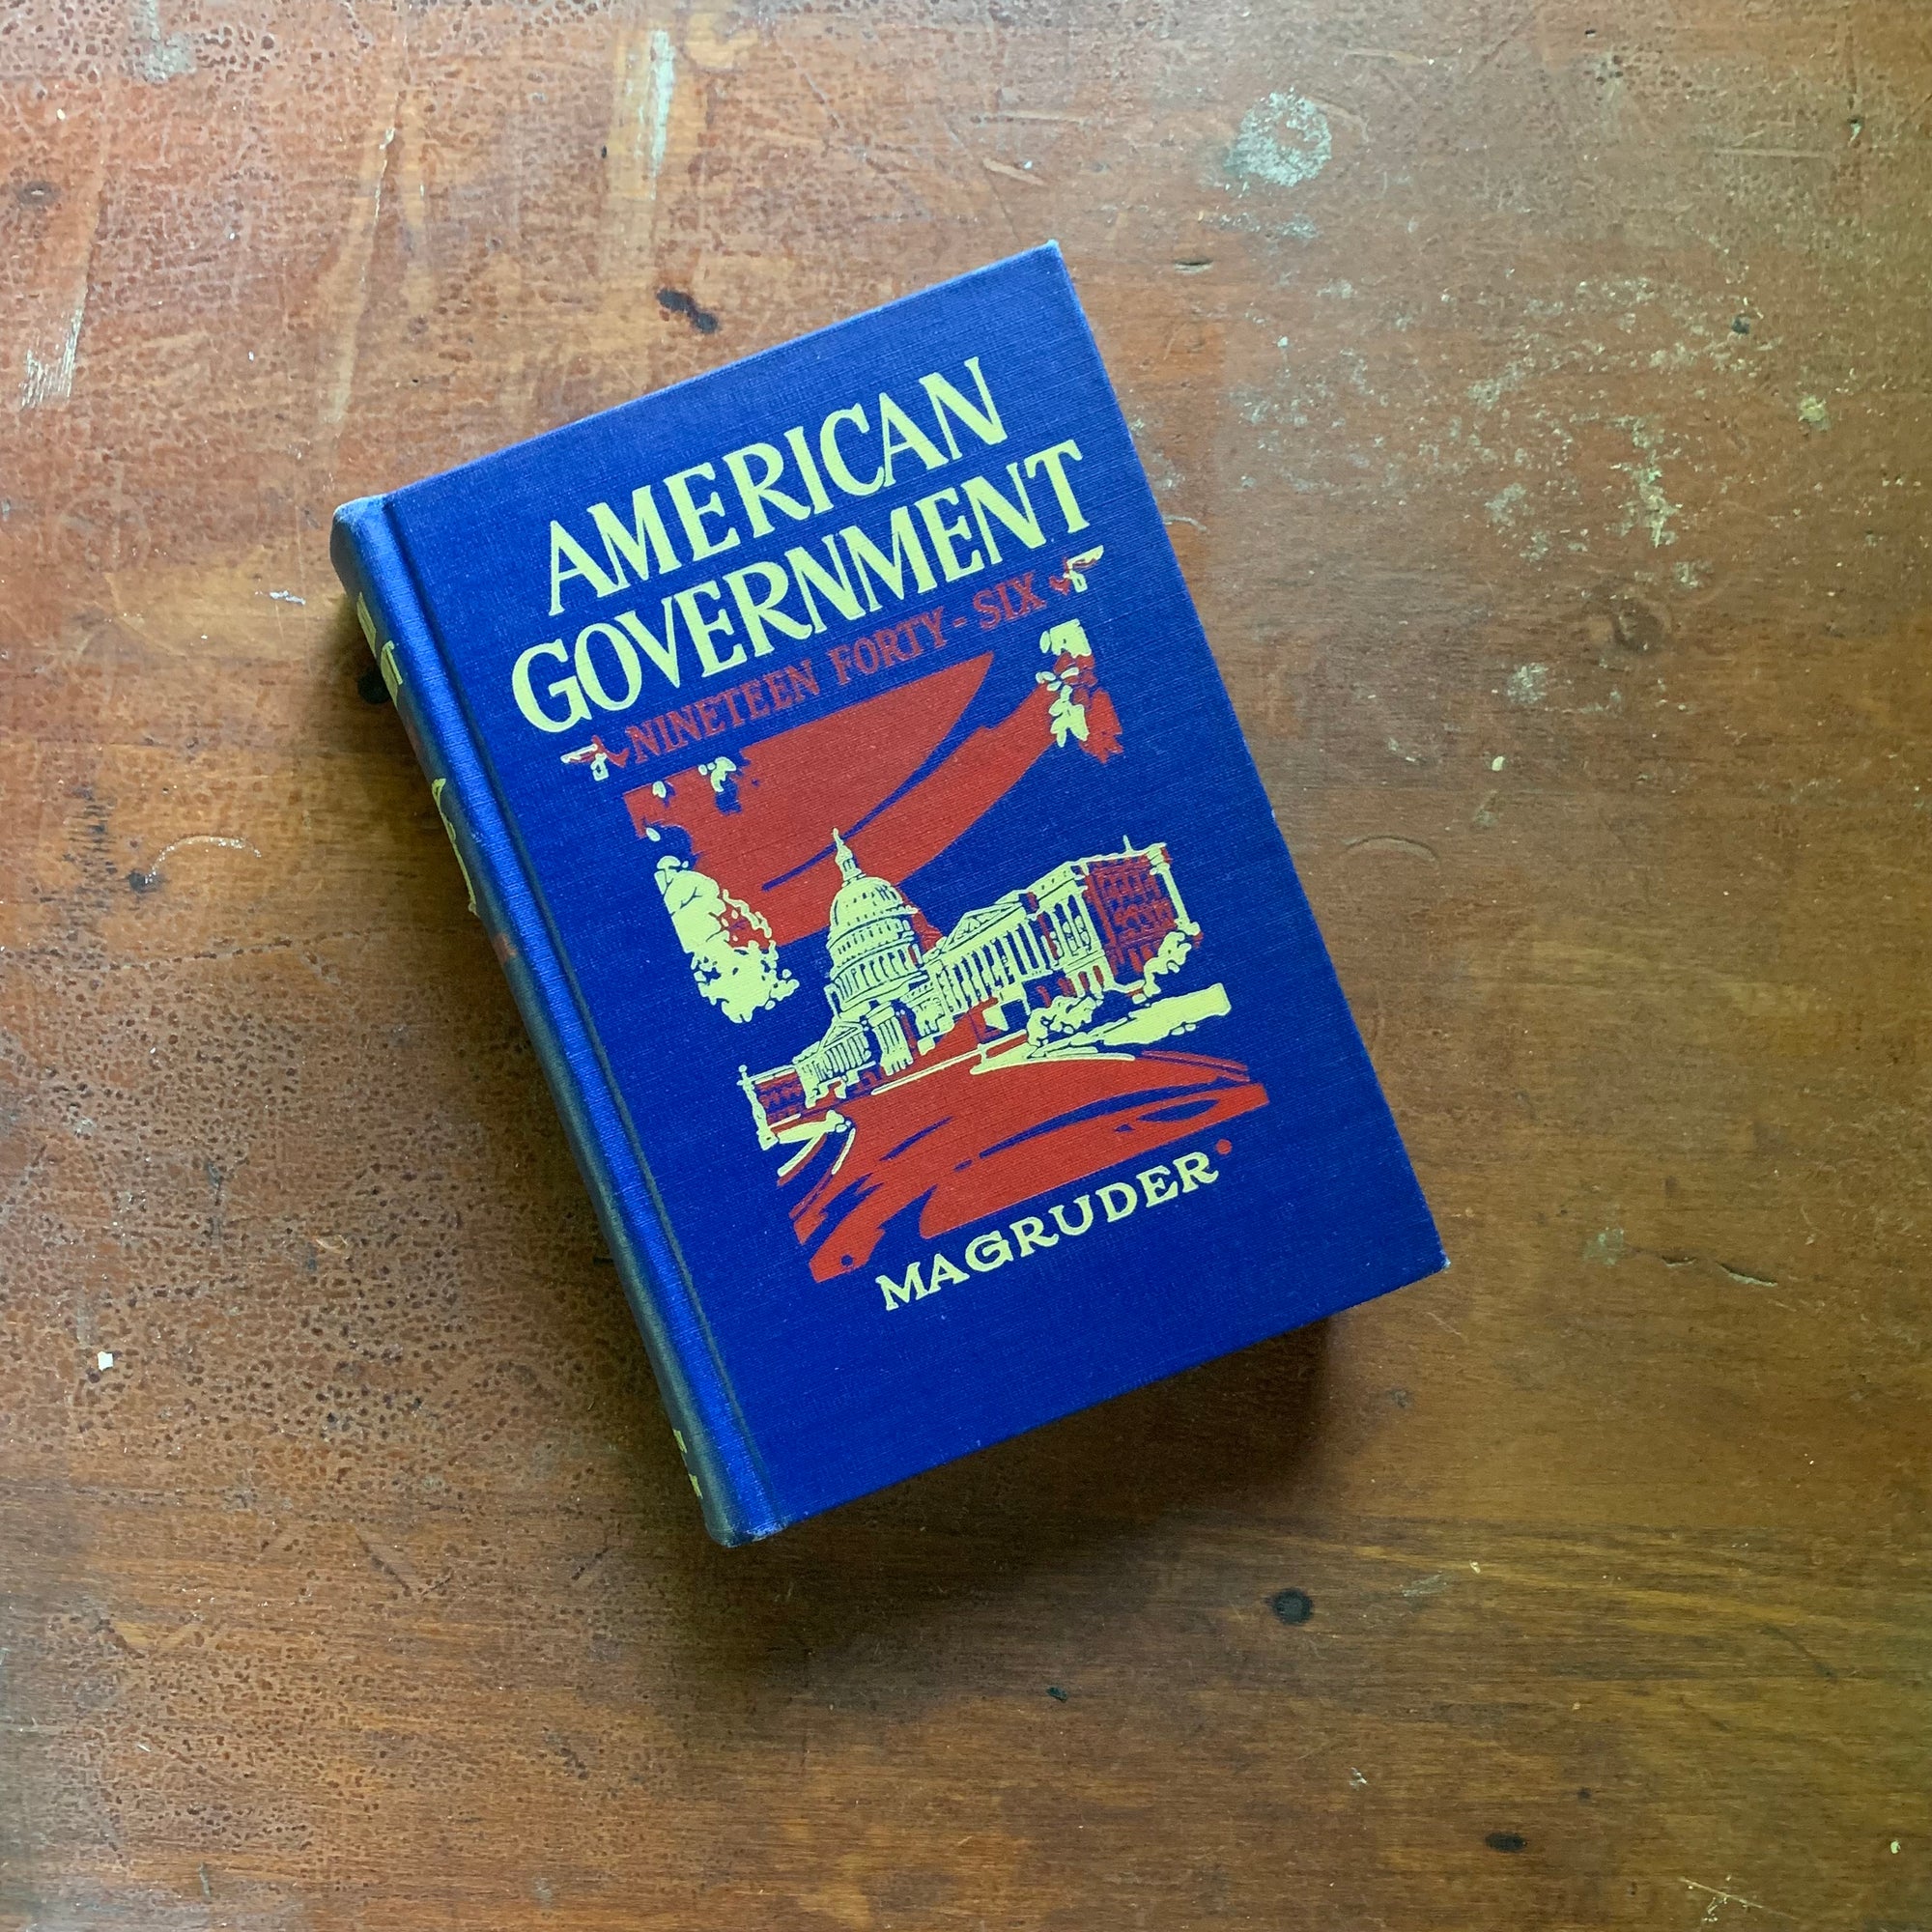 American Government 1946 Hardcover Edition by Magruder - Cover View